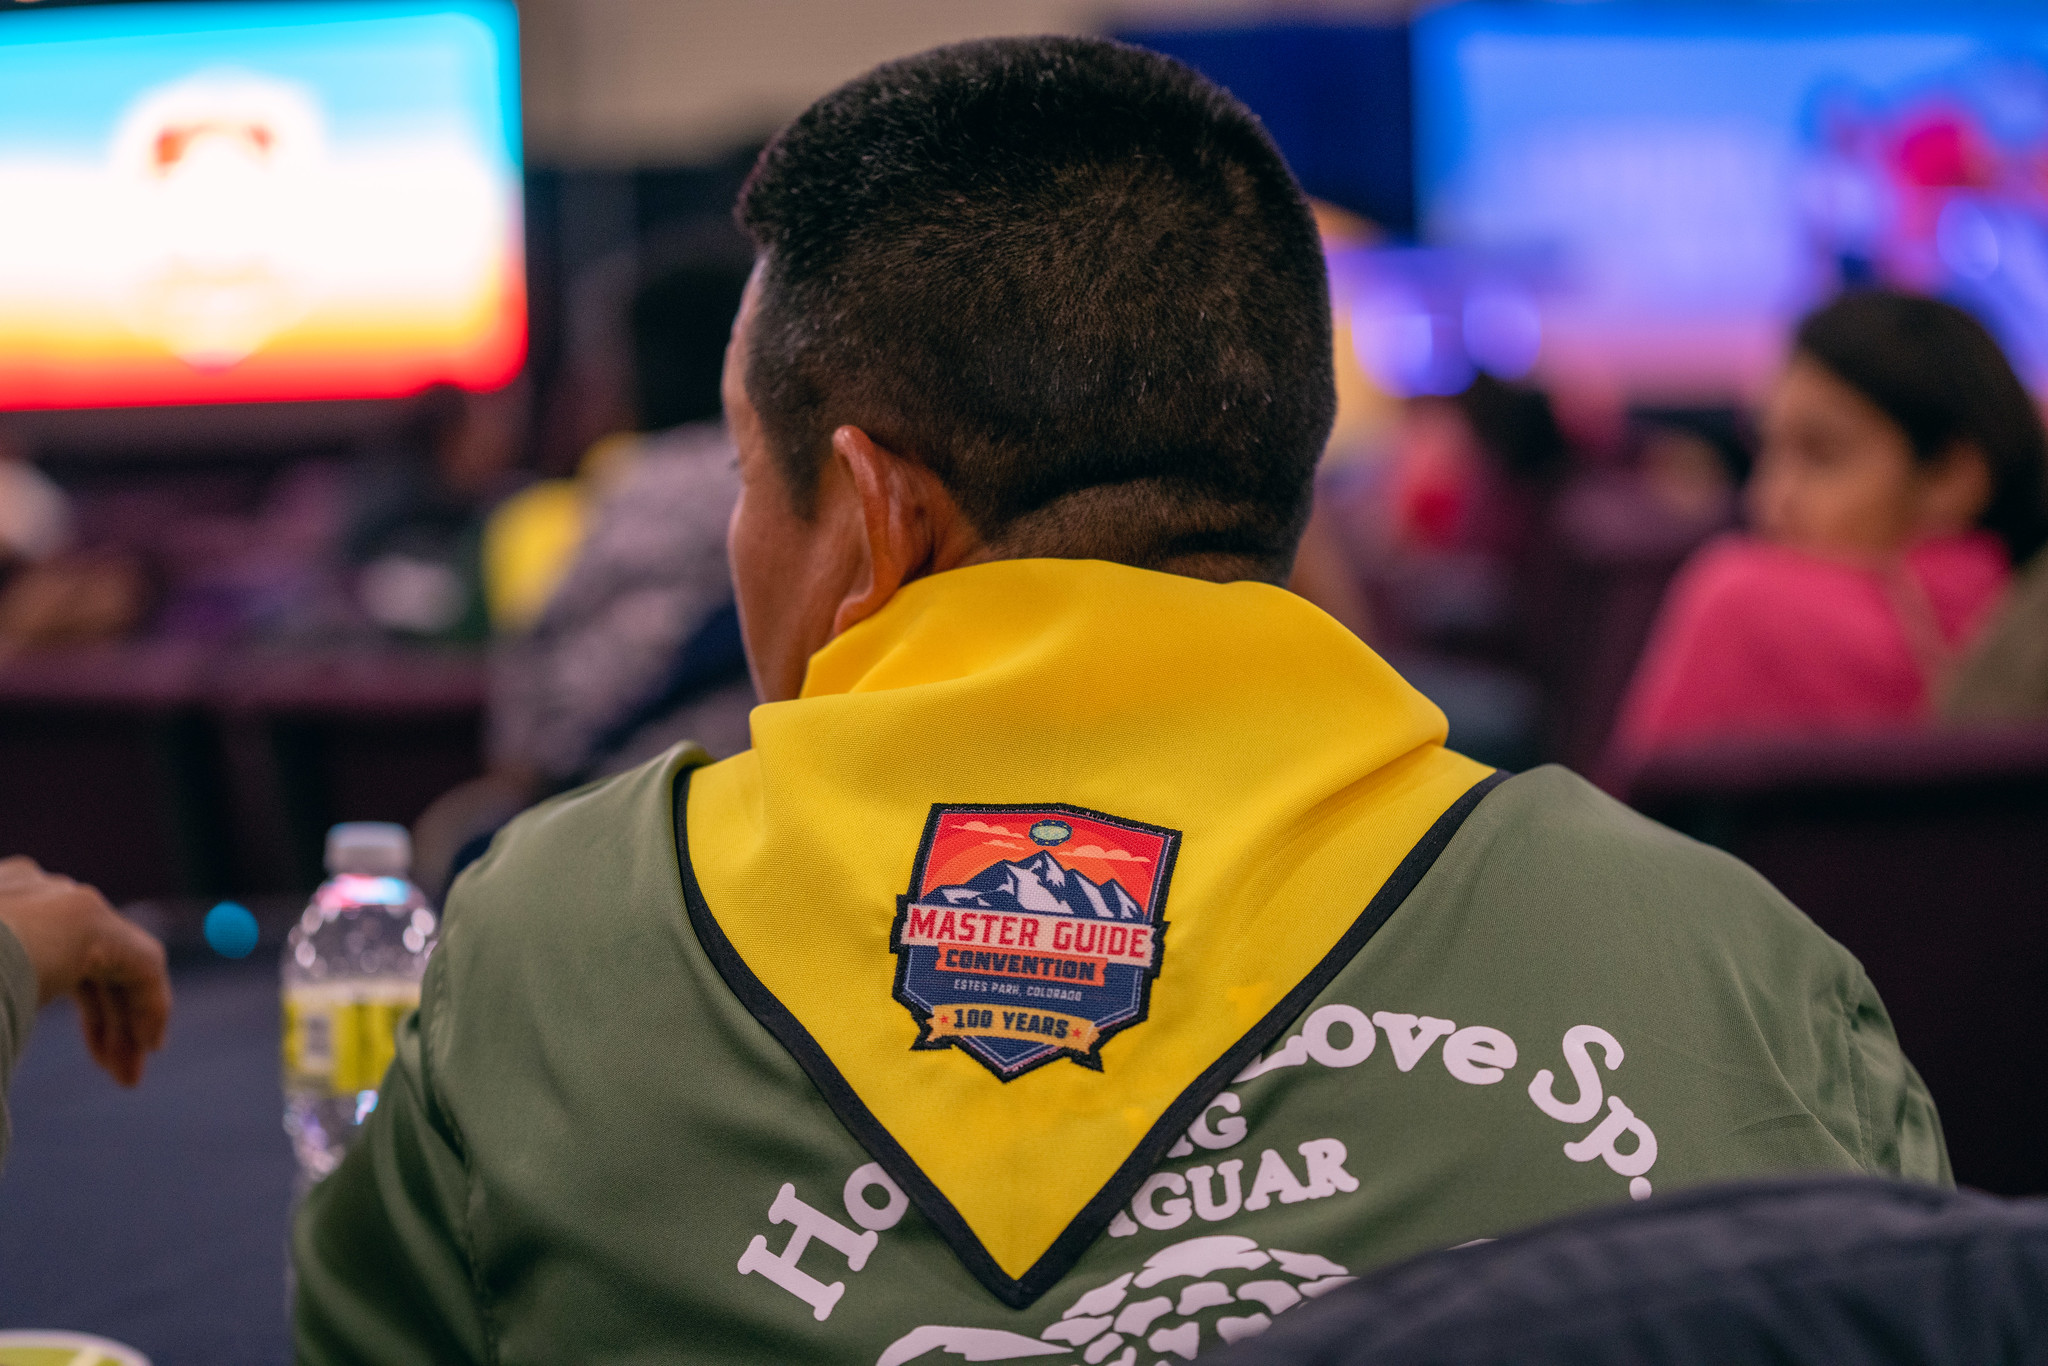 An attendee wears a pathfinder scarf emblazoned with the 100-year anniversary Master Guide Convention logo. Photo by Pieter Damsteegt | North American Division